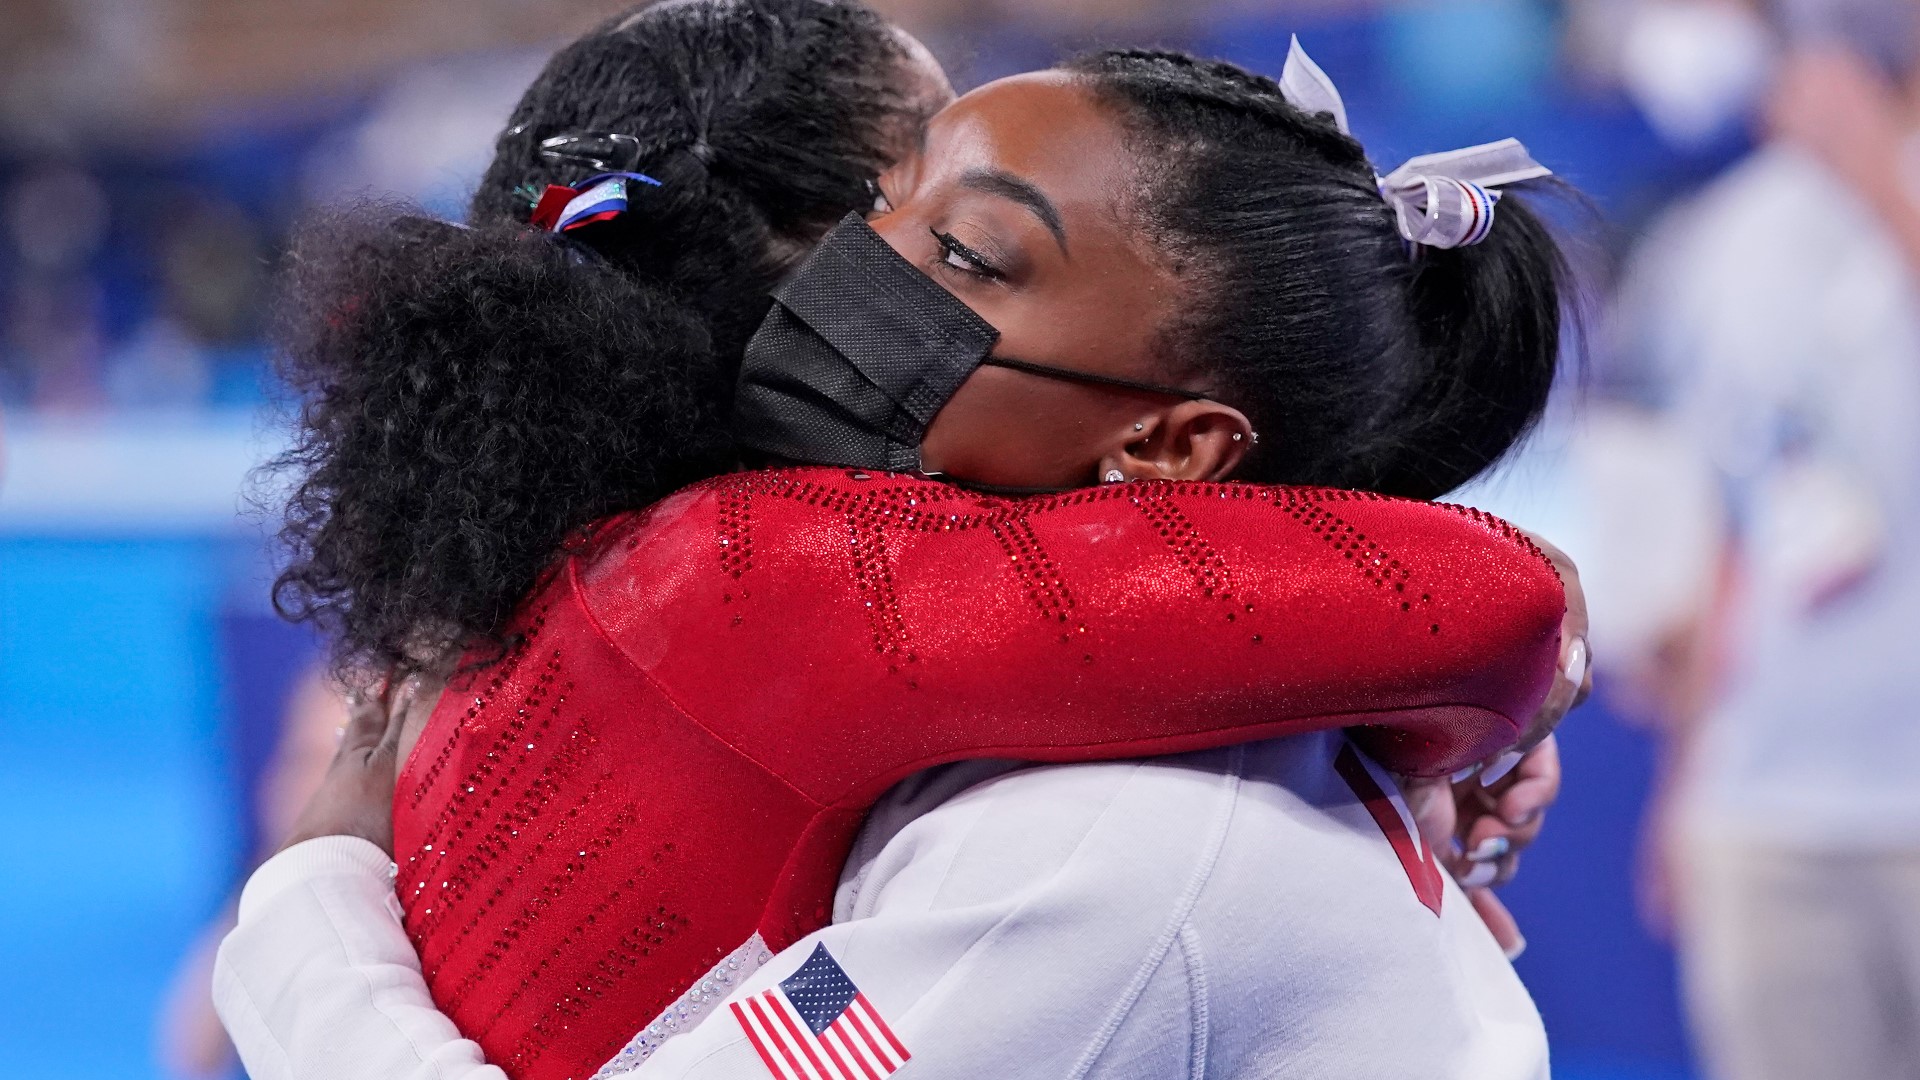 After a low score on vault, Team USA pulled a key gymnast from the competition.